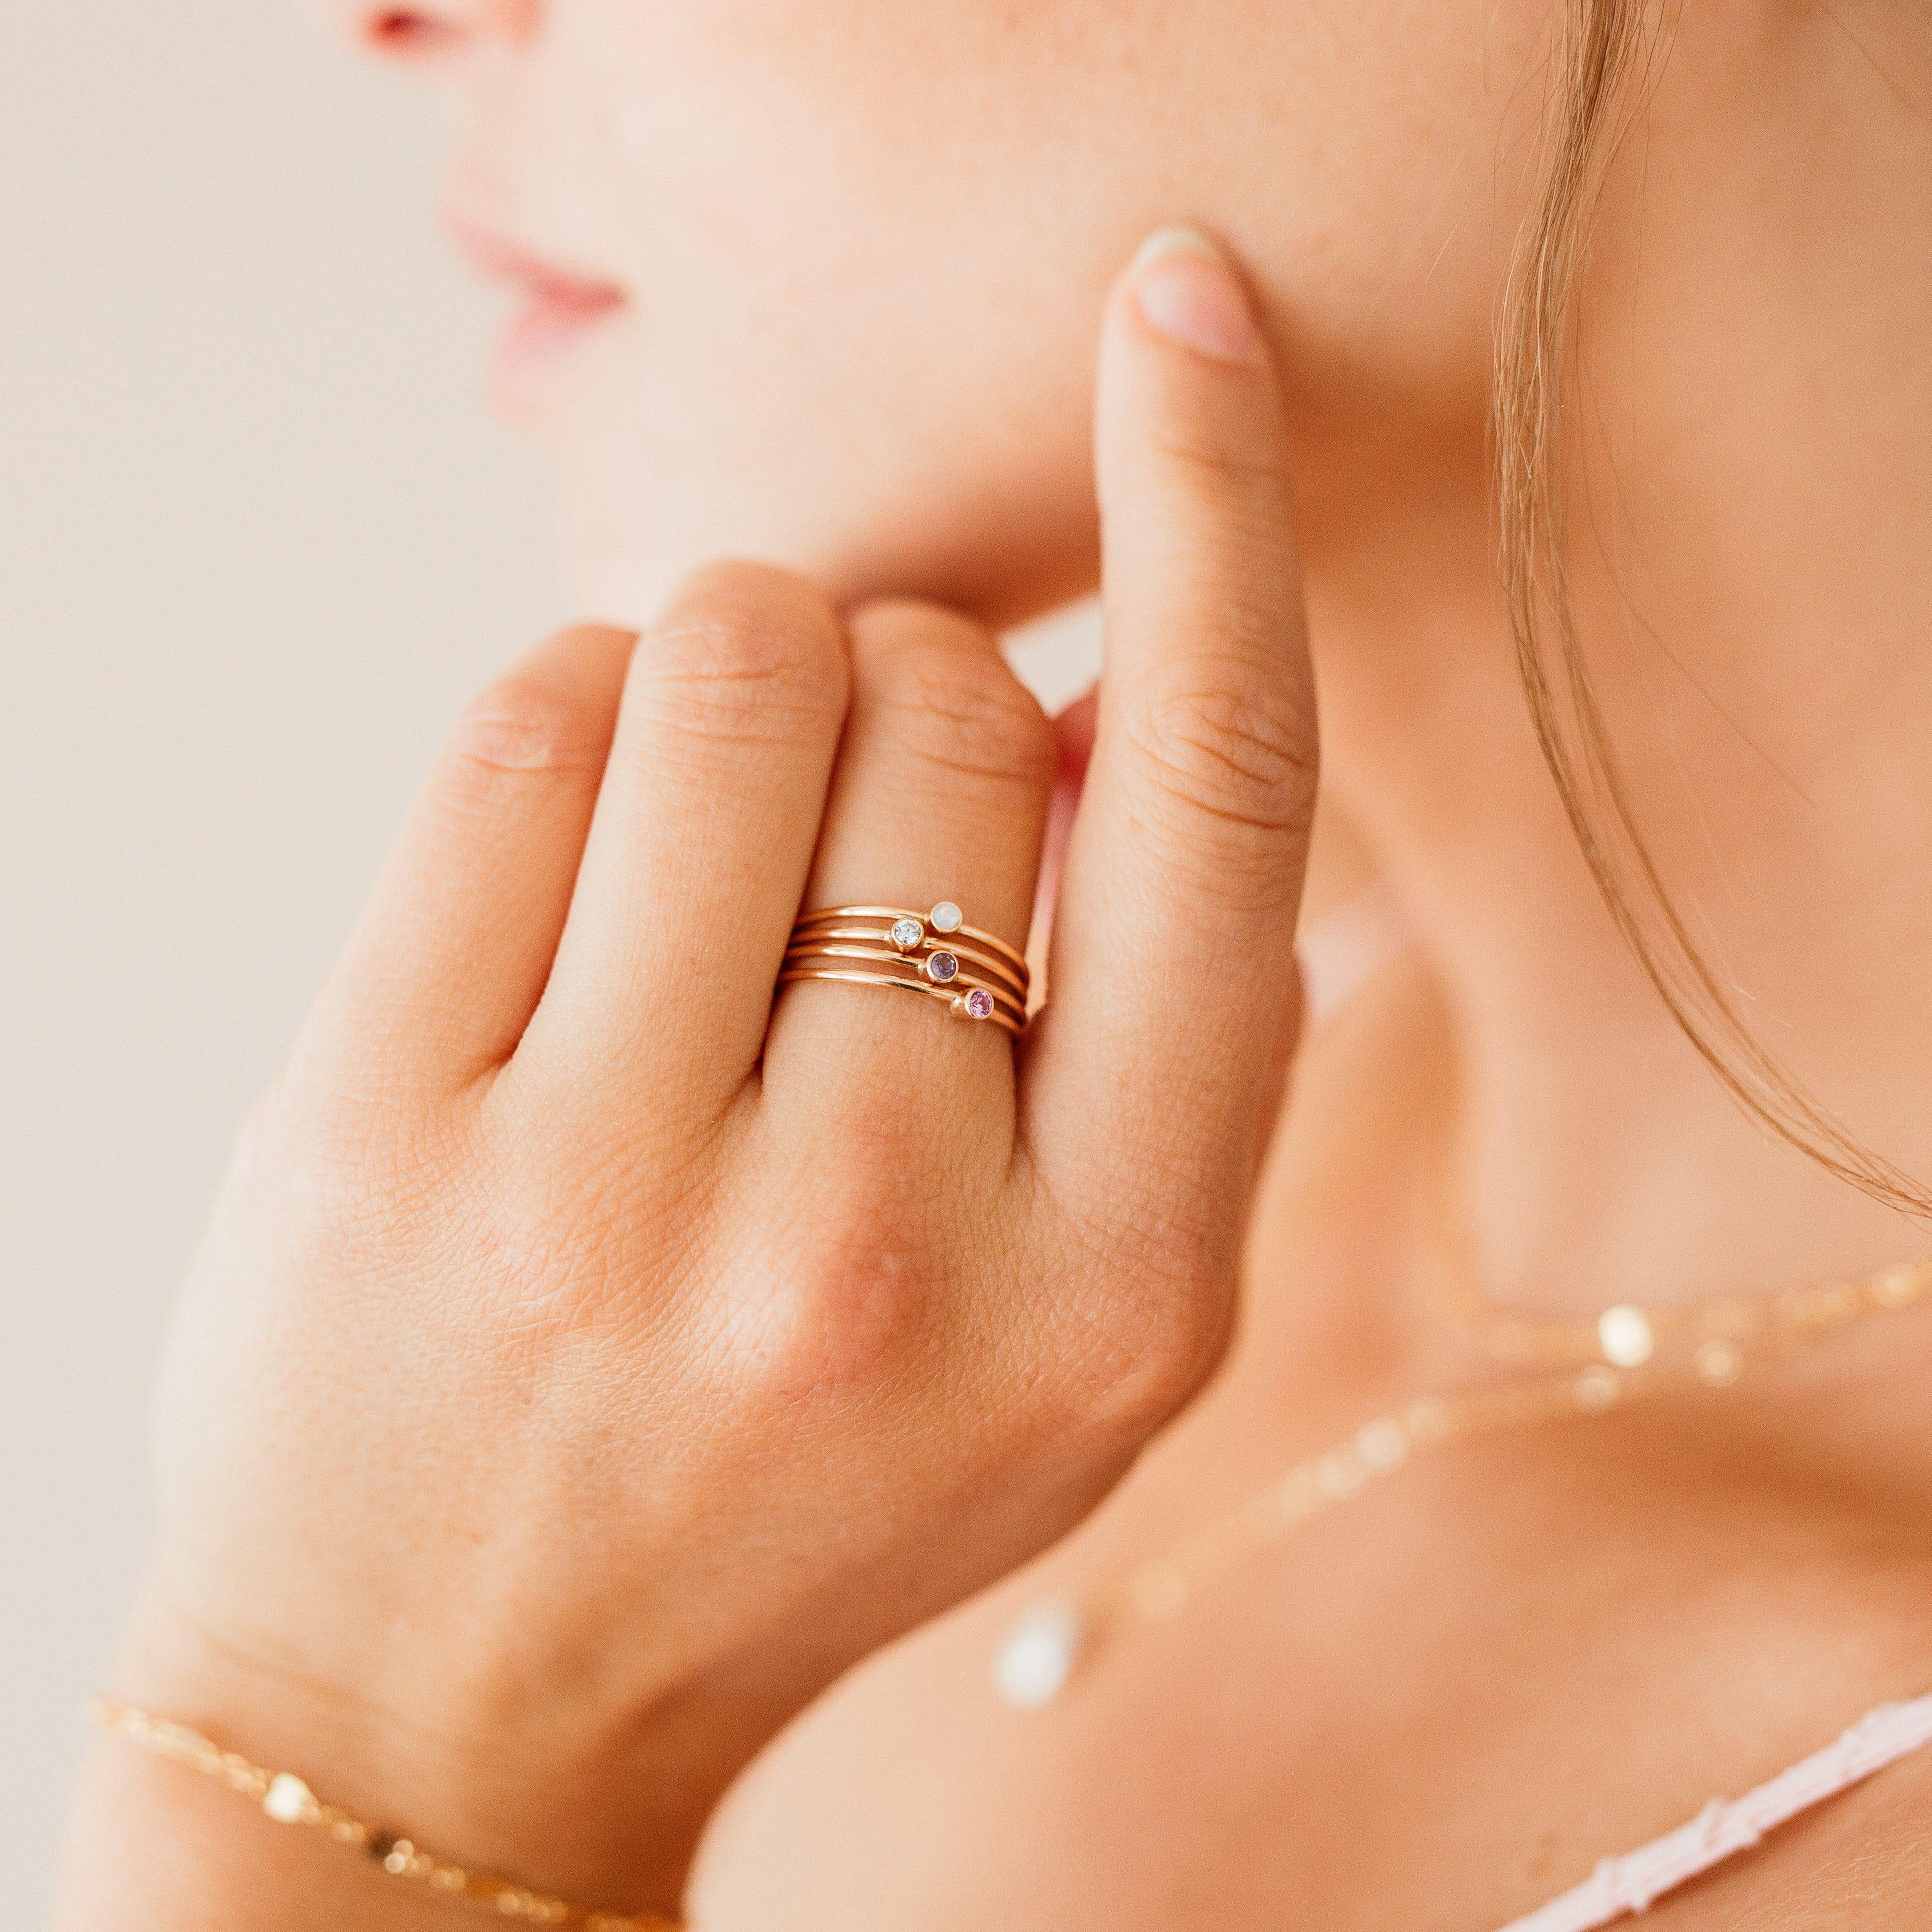 Tiny August Birthstone Ring ∙ Peridot - Nolia Jewelry - Meaningful + Sustainably Handcrafted Jewelry